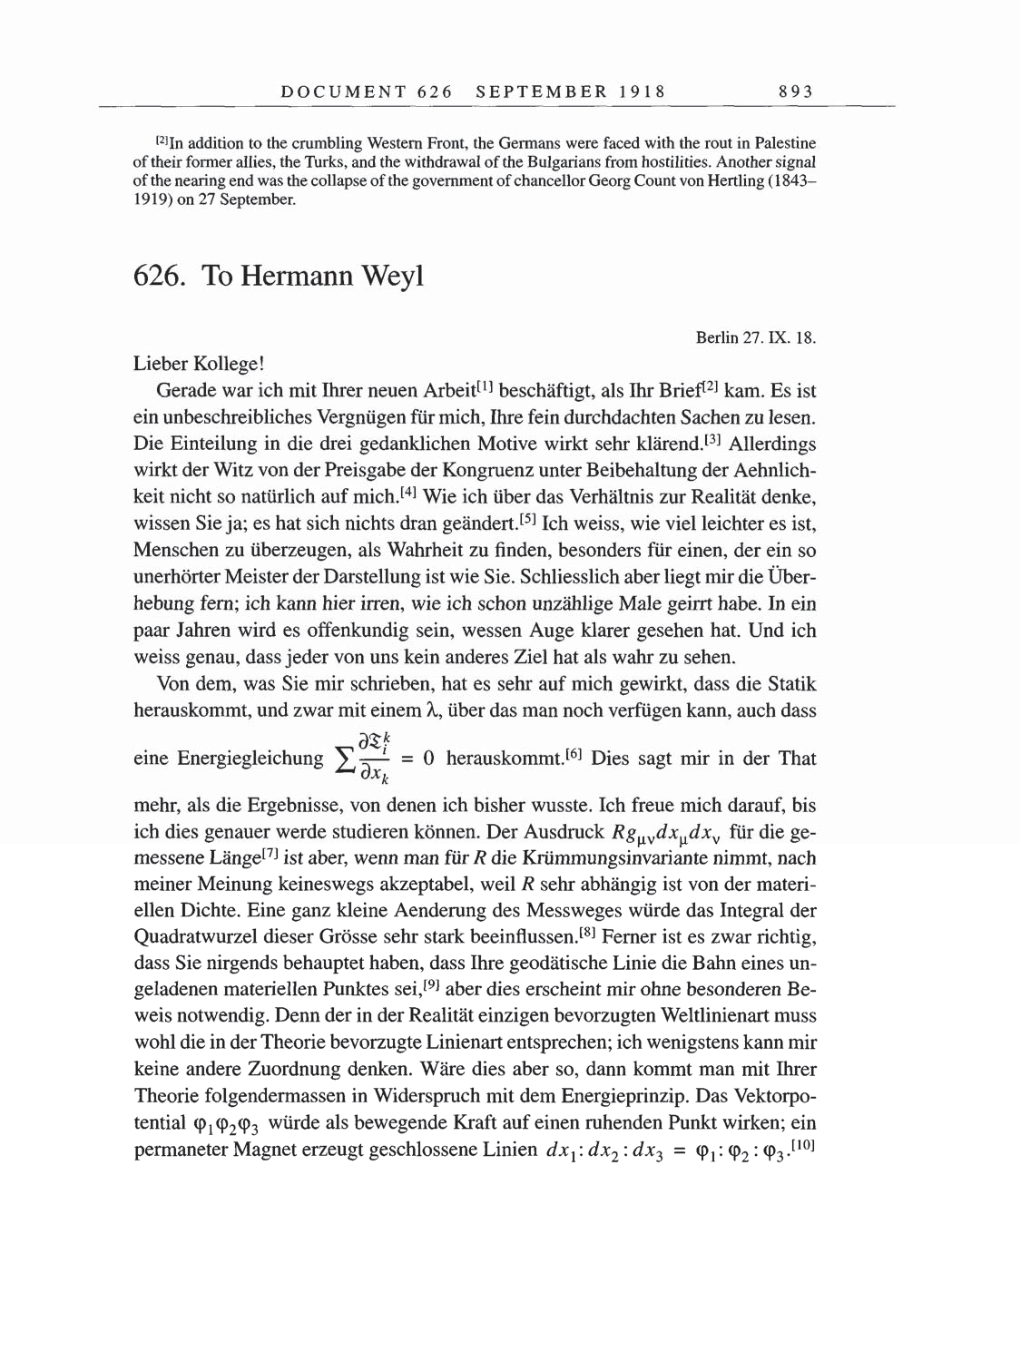 Volume 8, Part B: The Berlin Years: Correspondence 1918 page 893